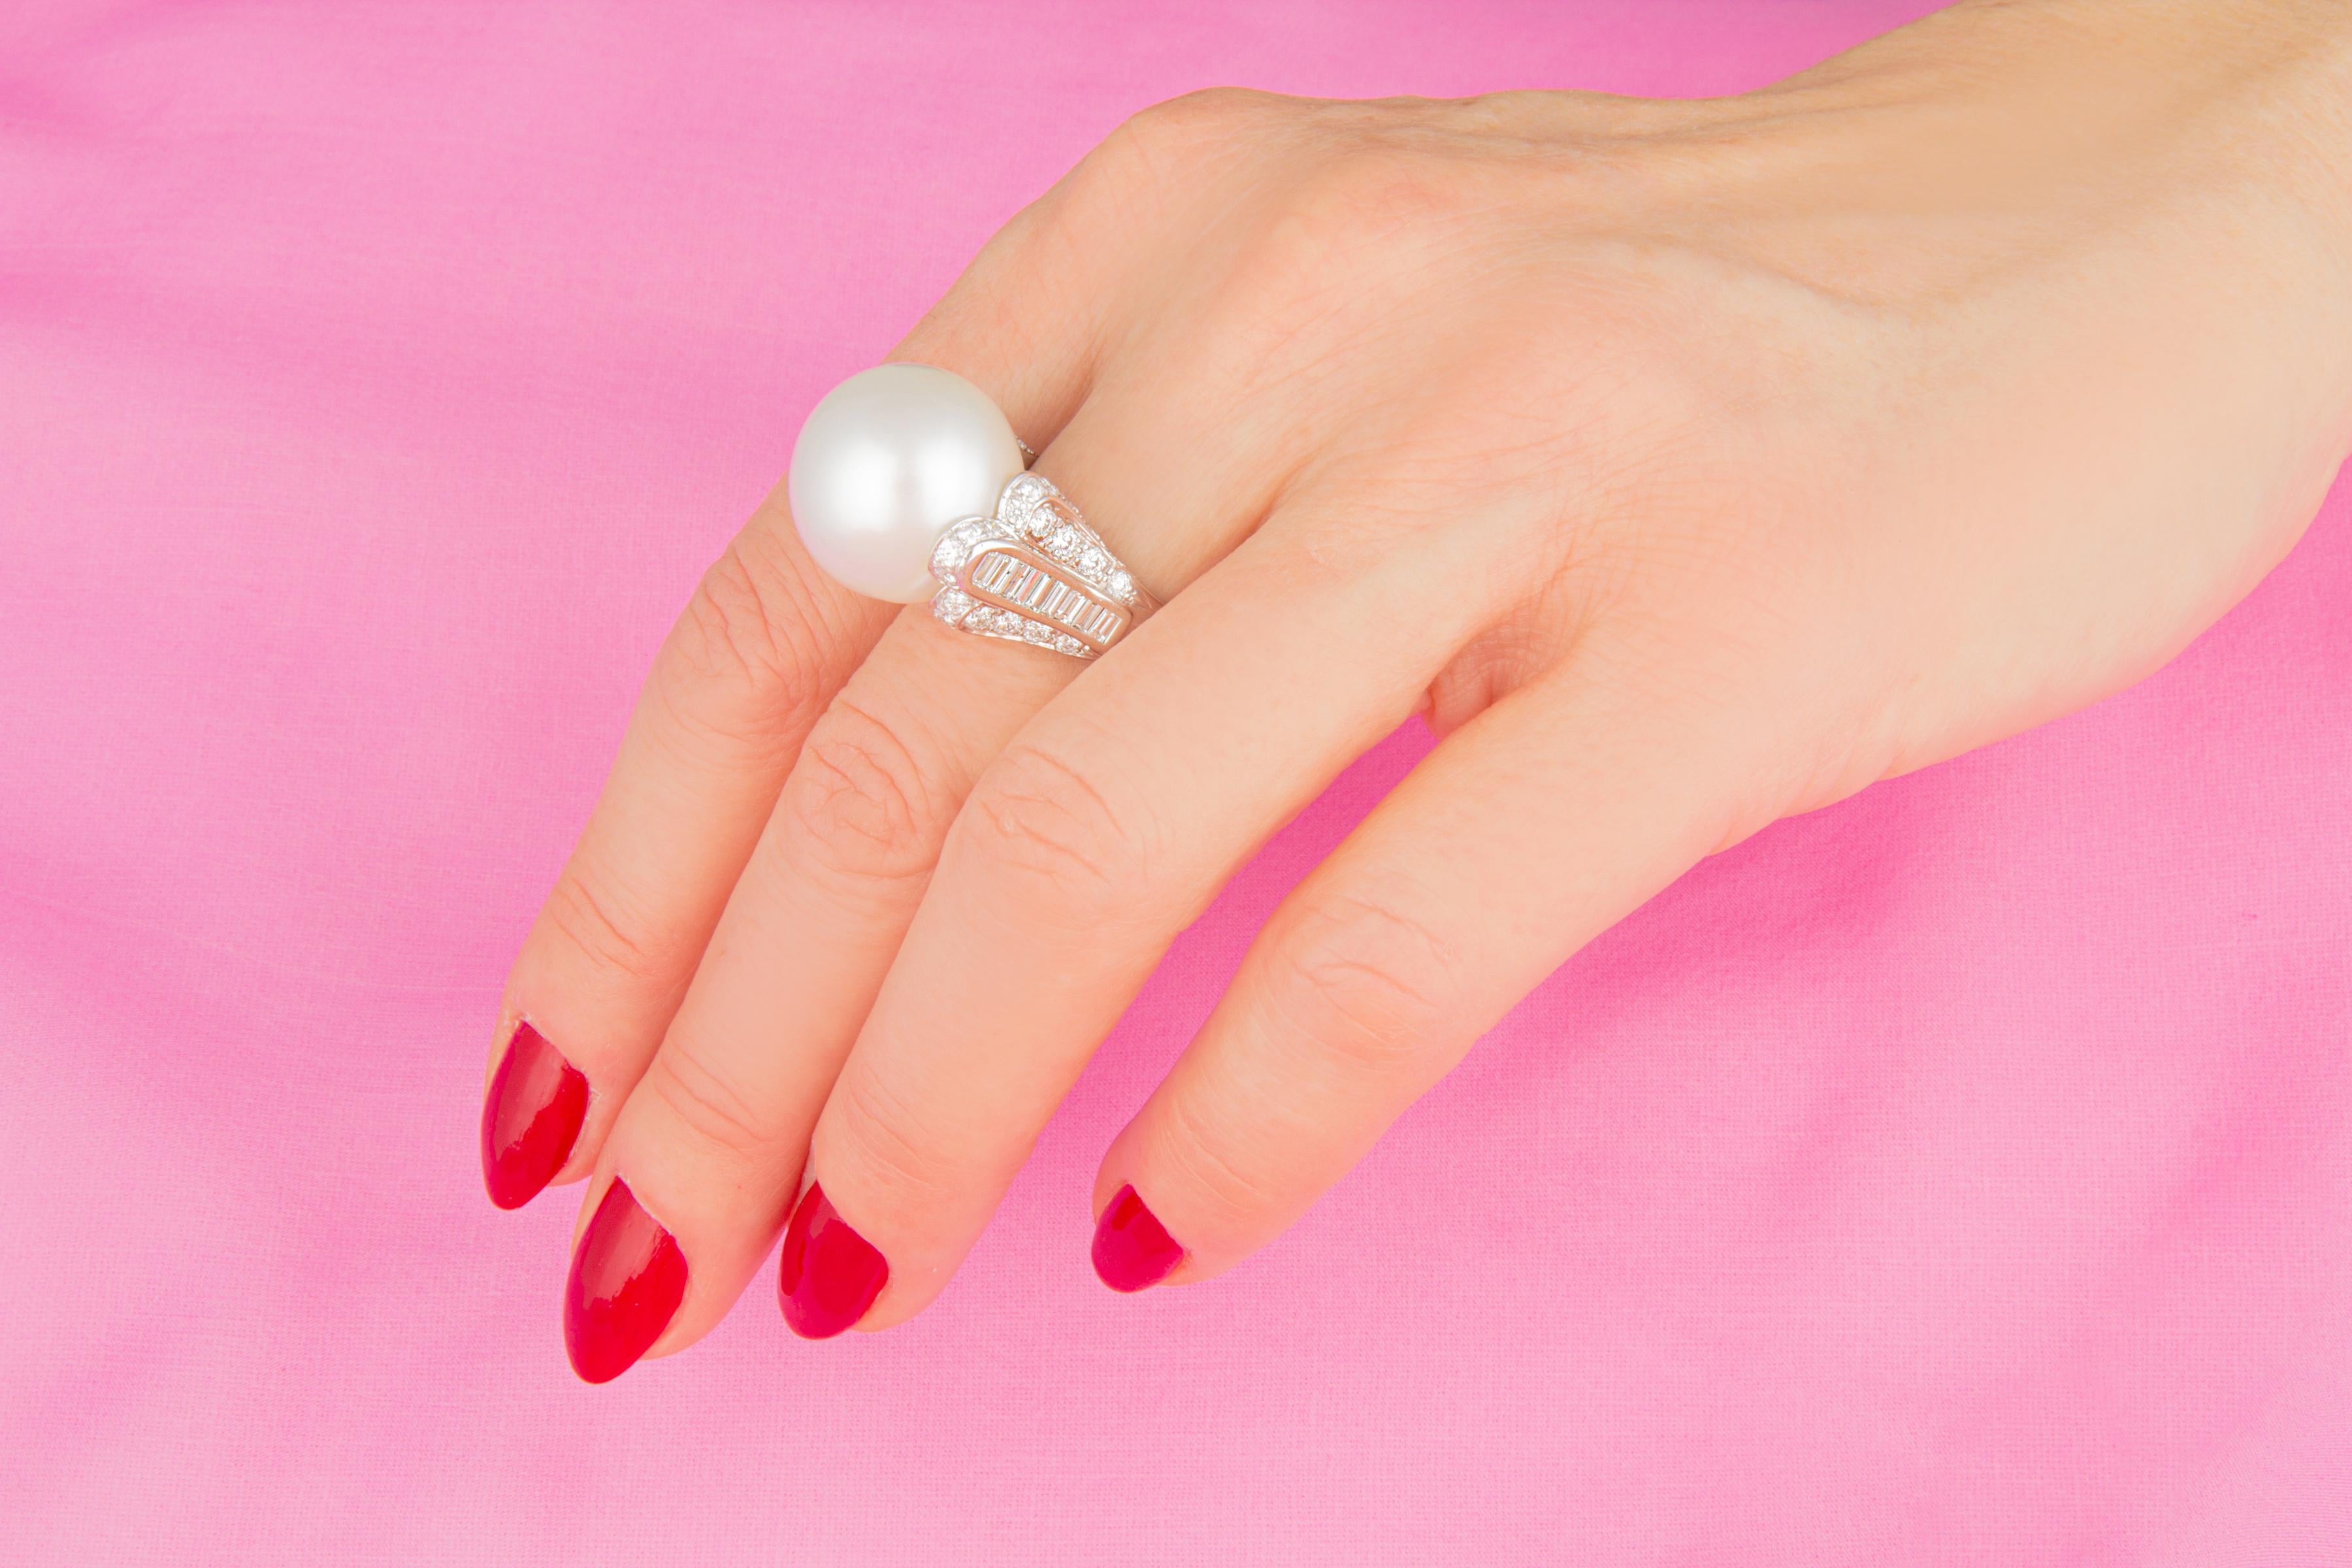 This pearl and diamond cocktail ring features a large South Sea pearl of 18mm diameter. The pearl is untreated. It displays a fine nacre and its natural color and luster have not been enhanced in any way. The pearl is highly exposed in an elegant